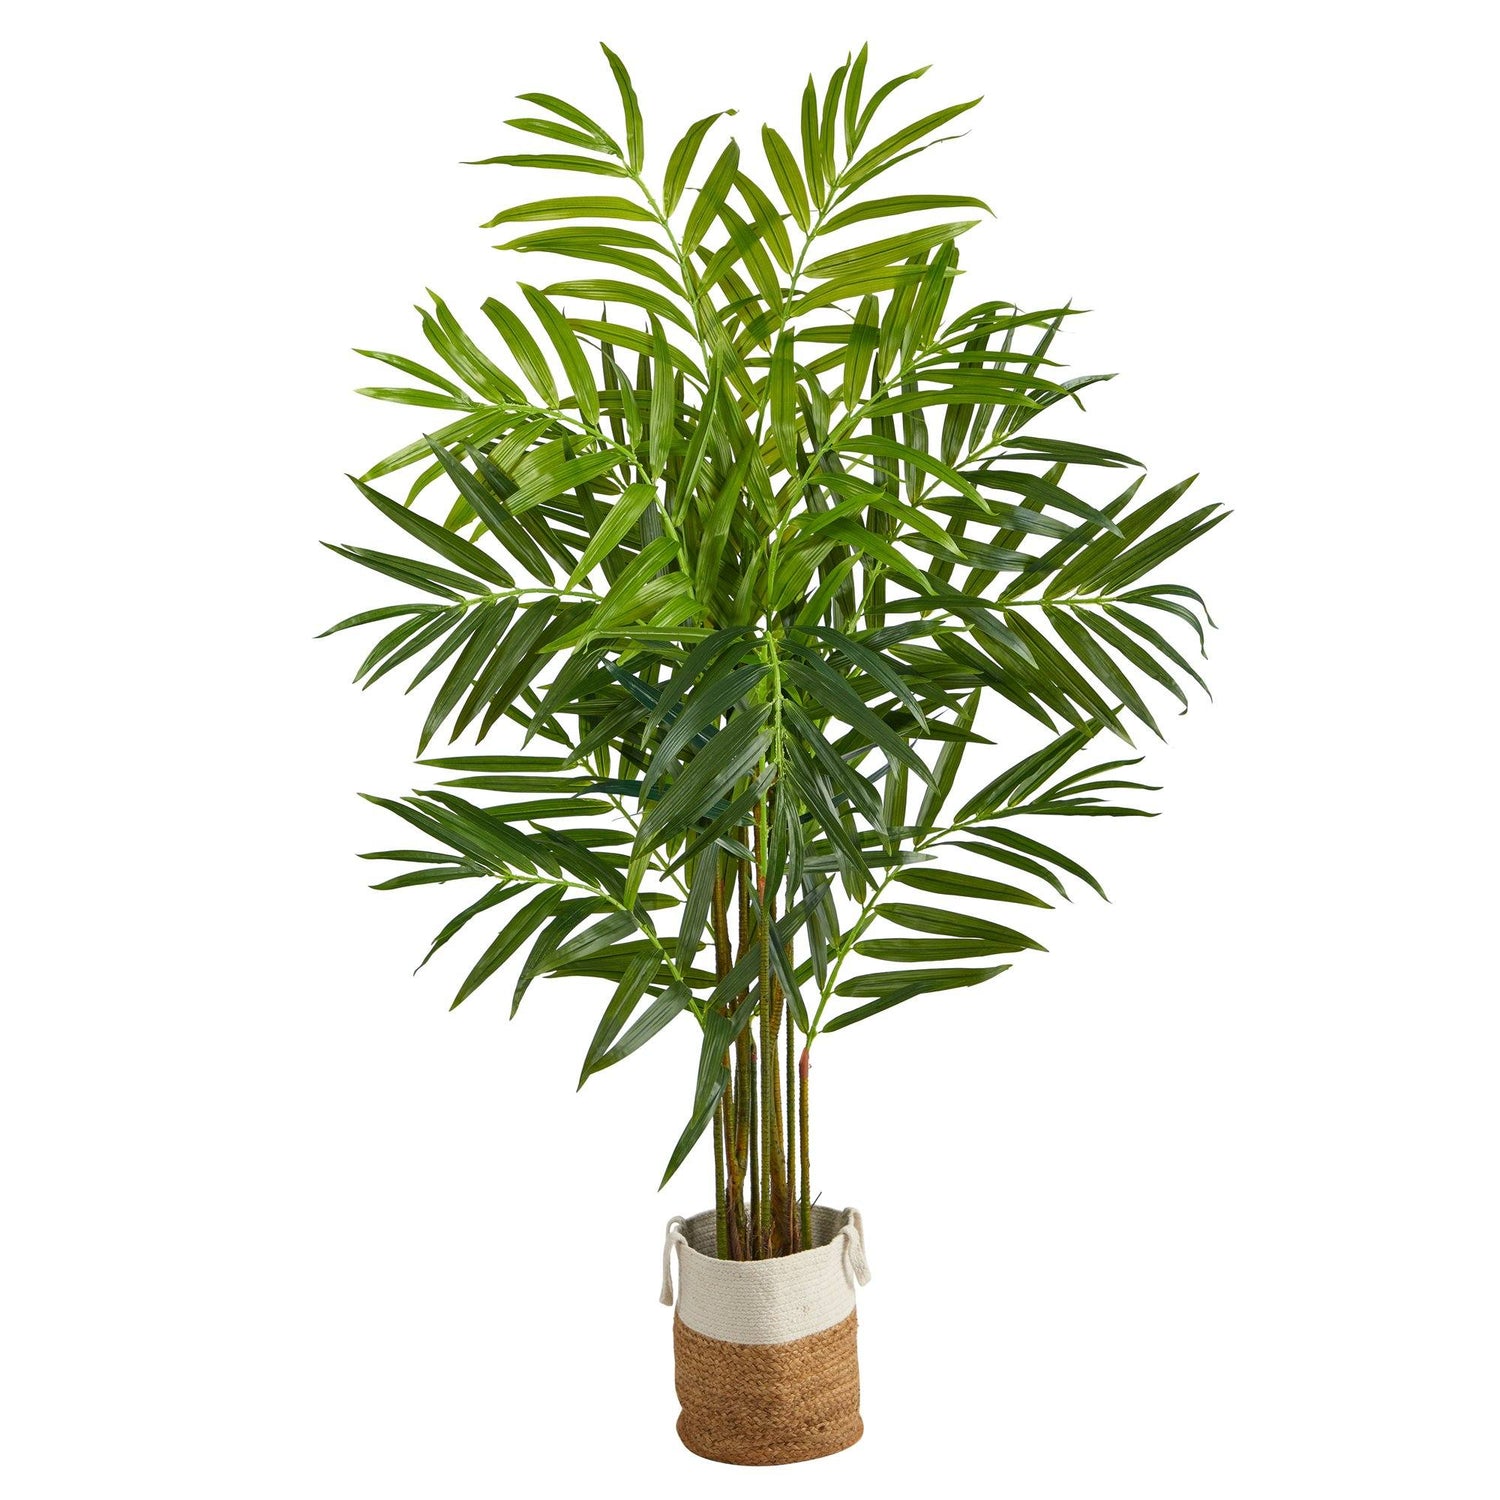 8’ King Palm Artificial Tree with 12 Bendable Branches in Handmade Natural Jute and Cotton Planter